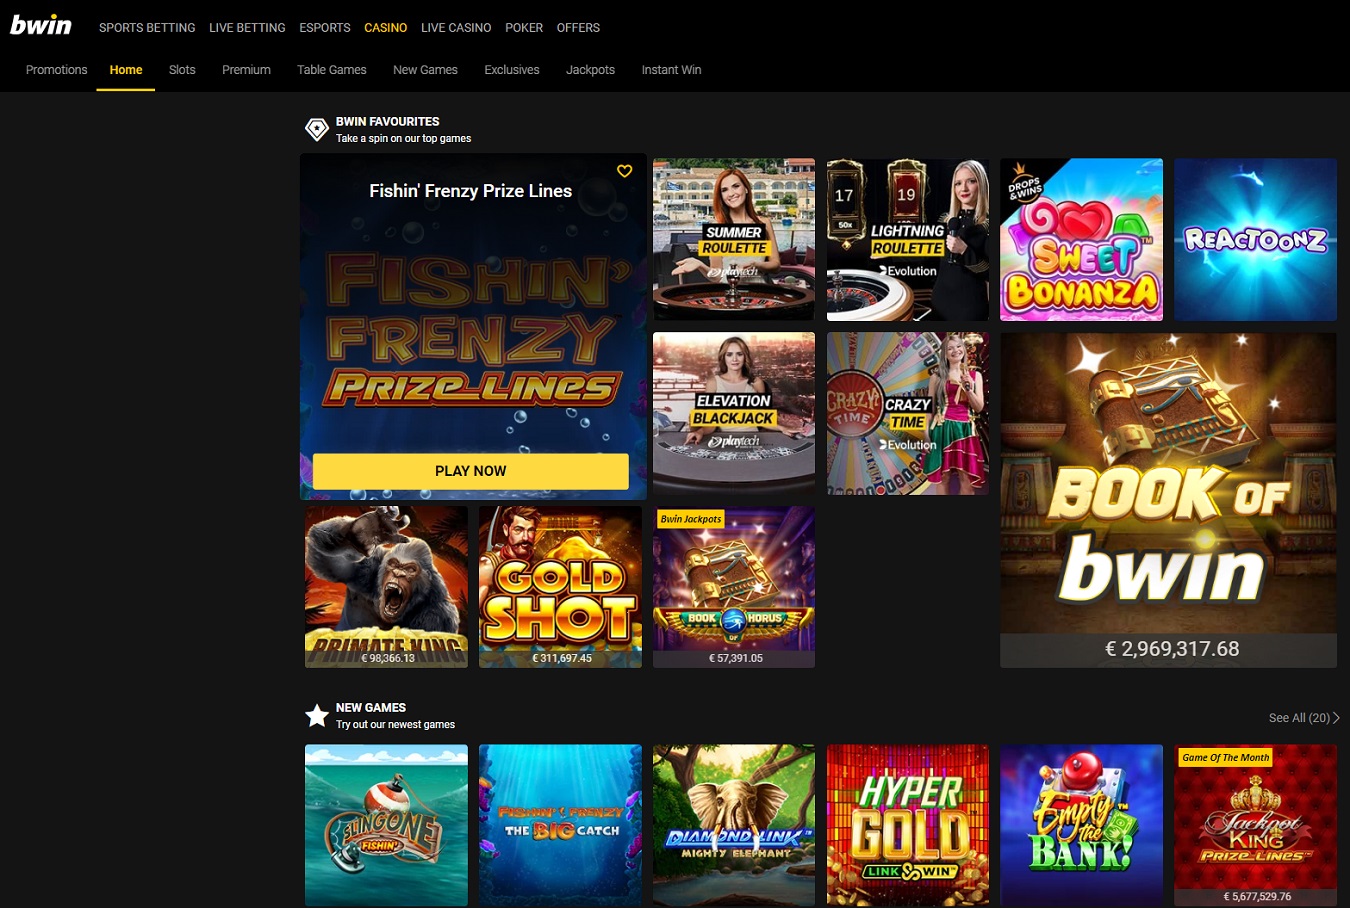 Casino and online casinos on the Bwin website